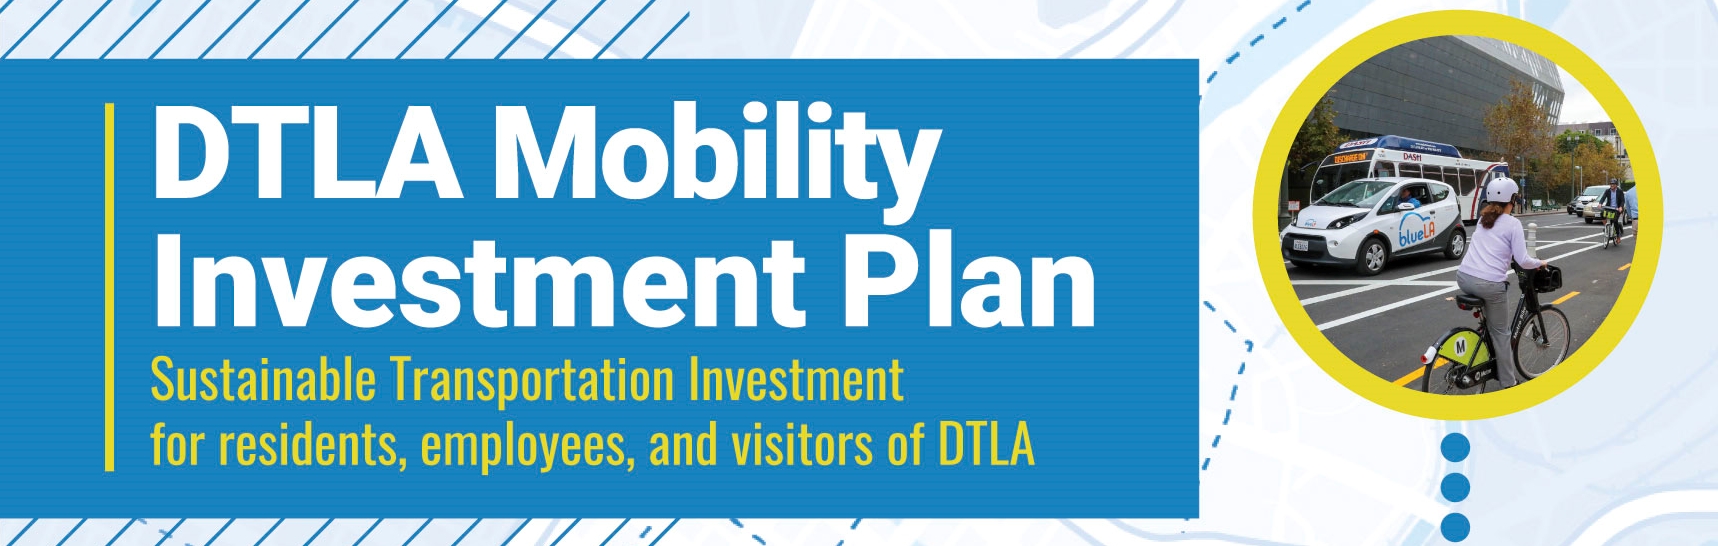 DTLA Mobility Investment Plan